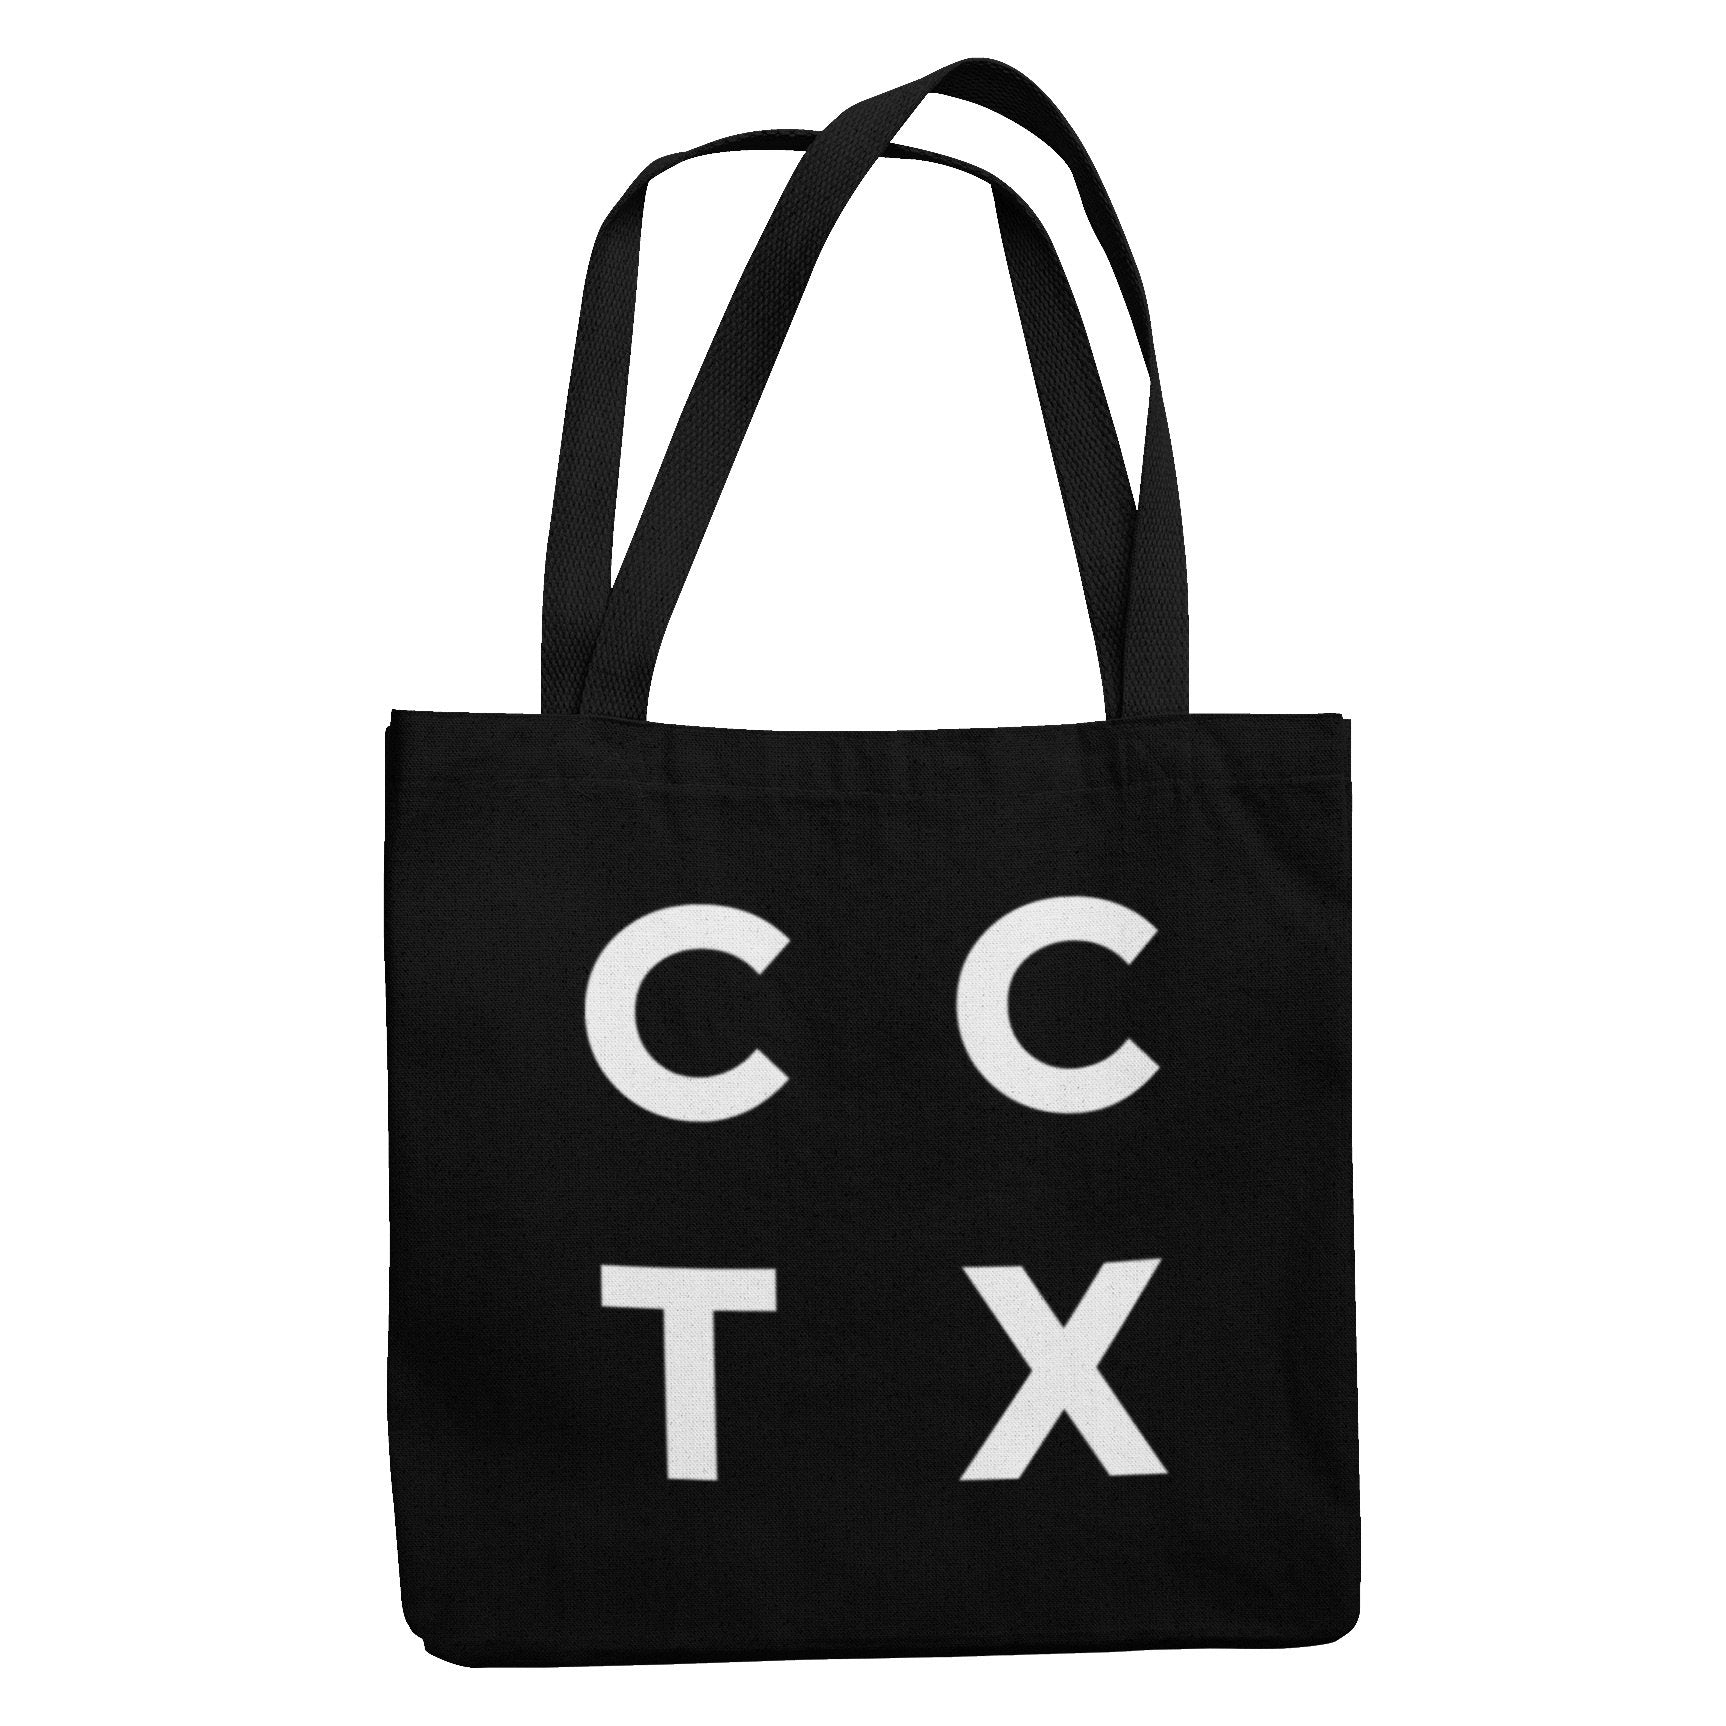 CCTX Stacked Tote